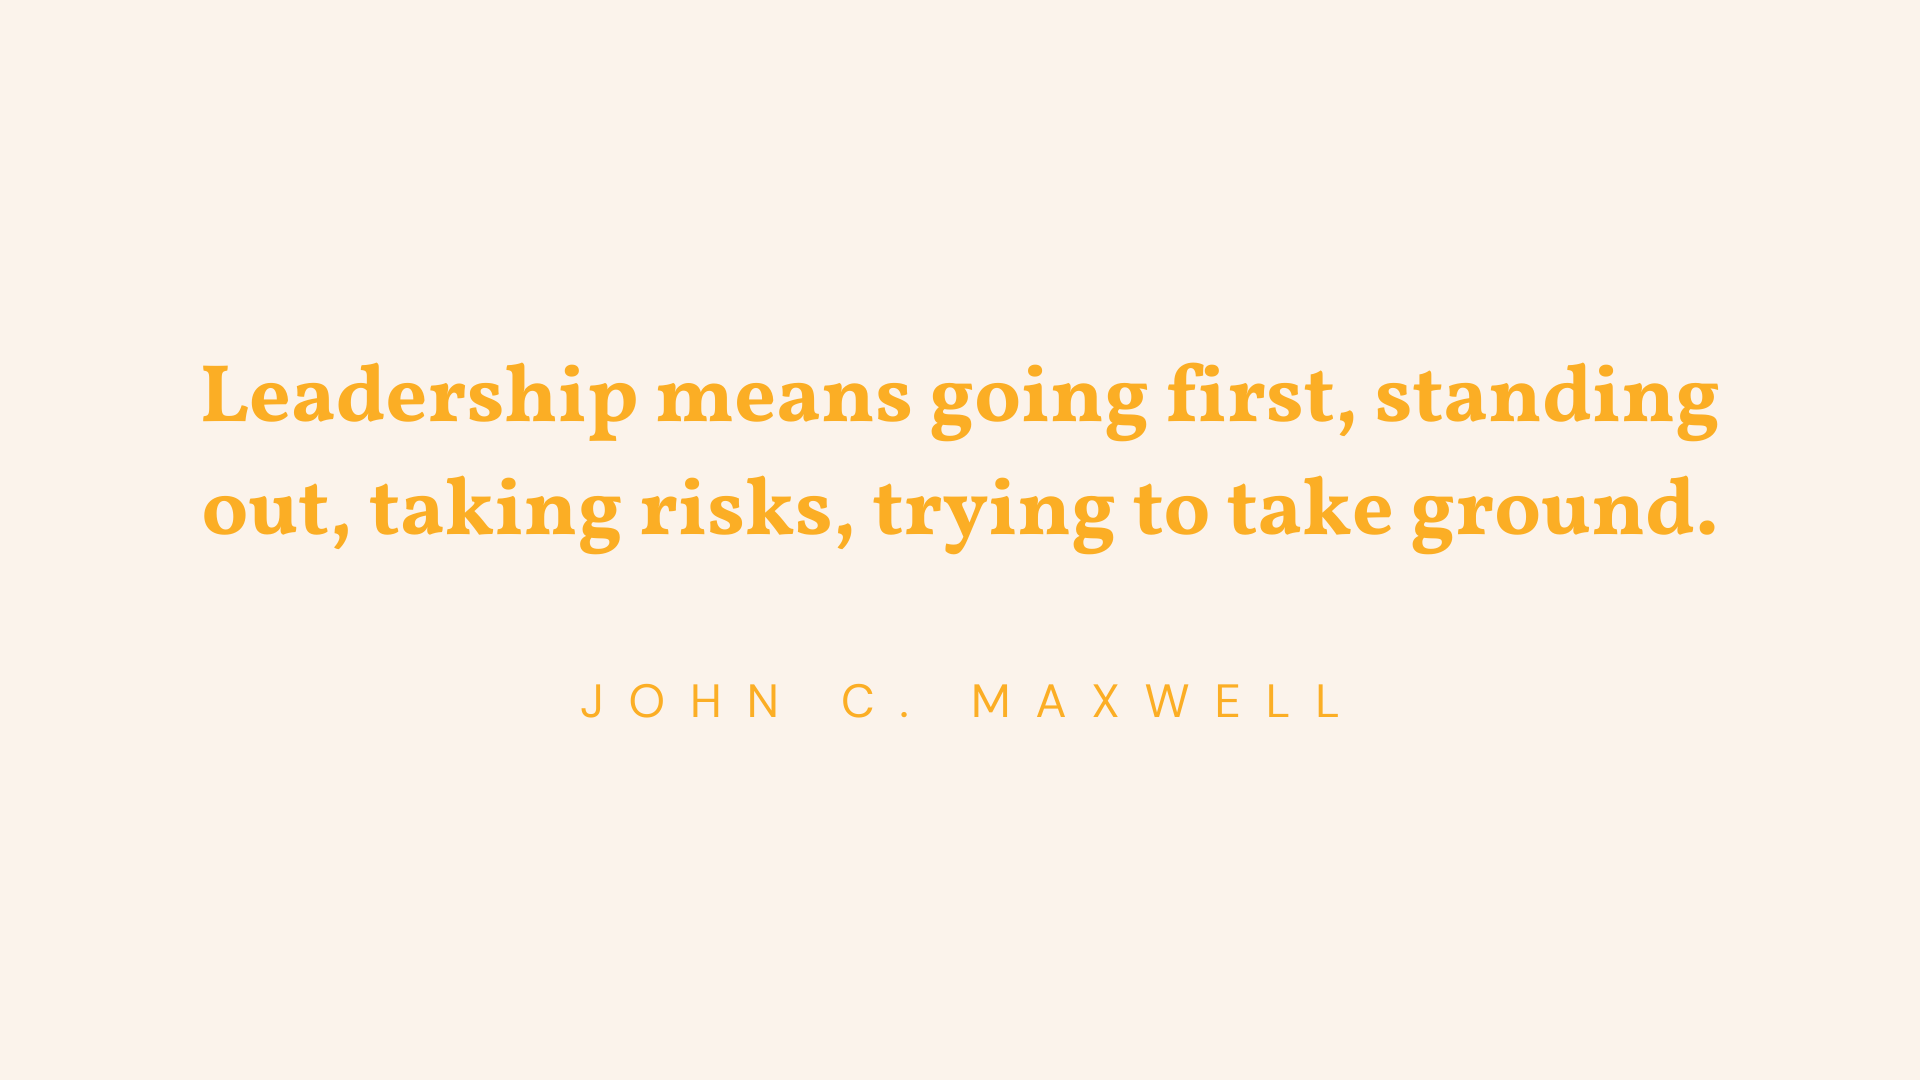 john maxwell quote from The Self-Aware Leader